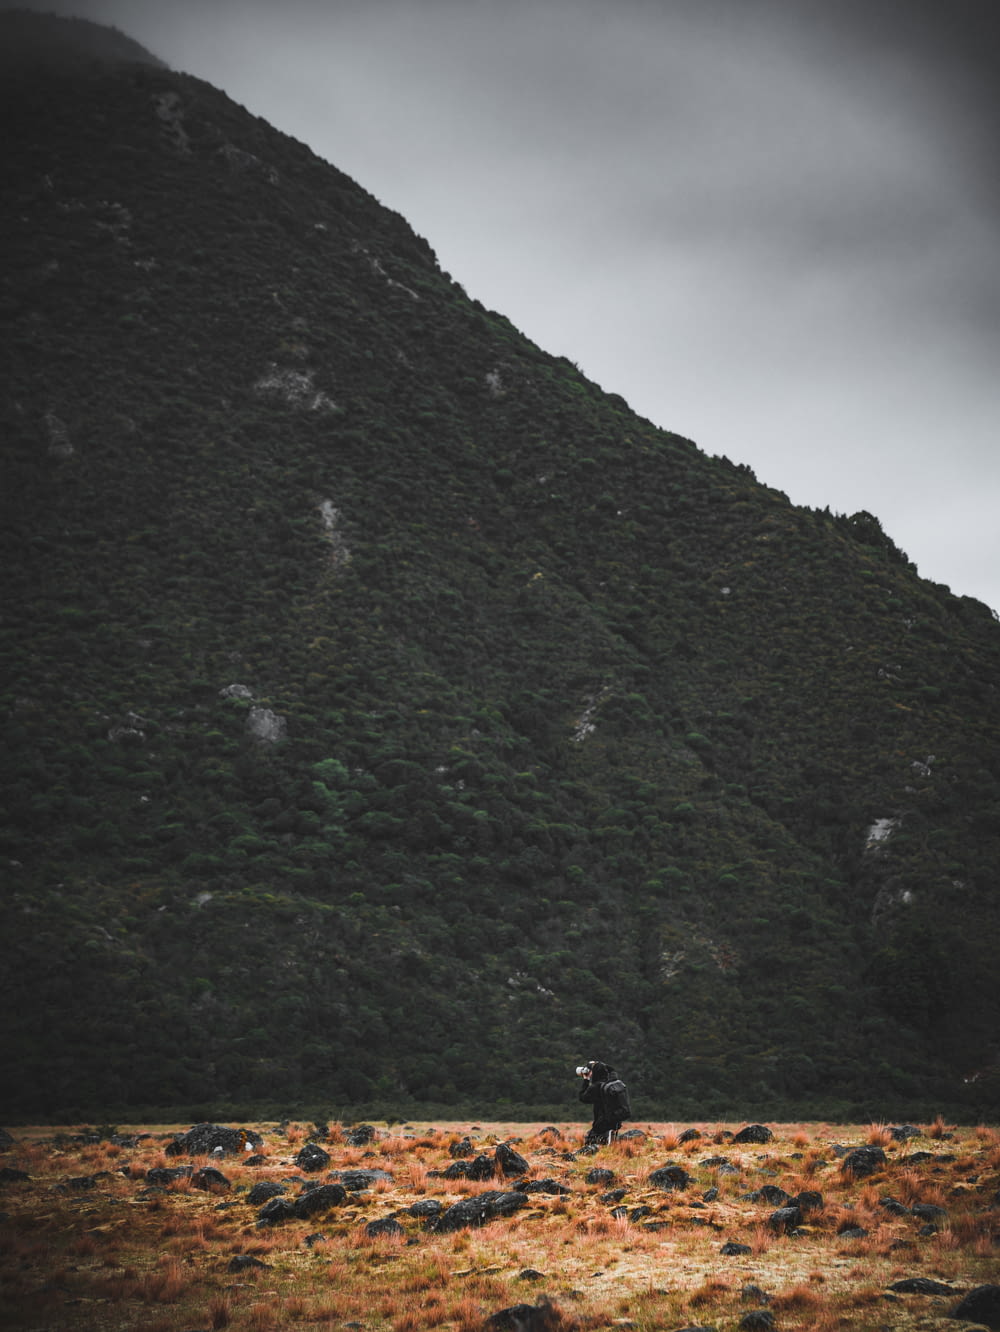 a person standing in a field with a mountain in the background